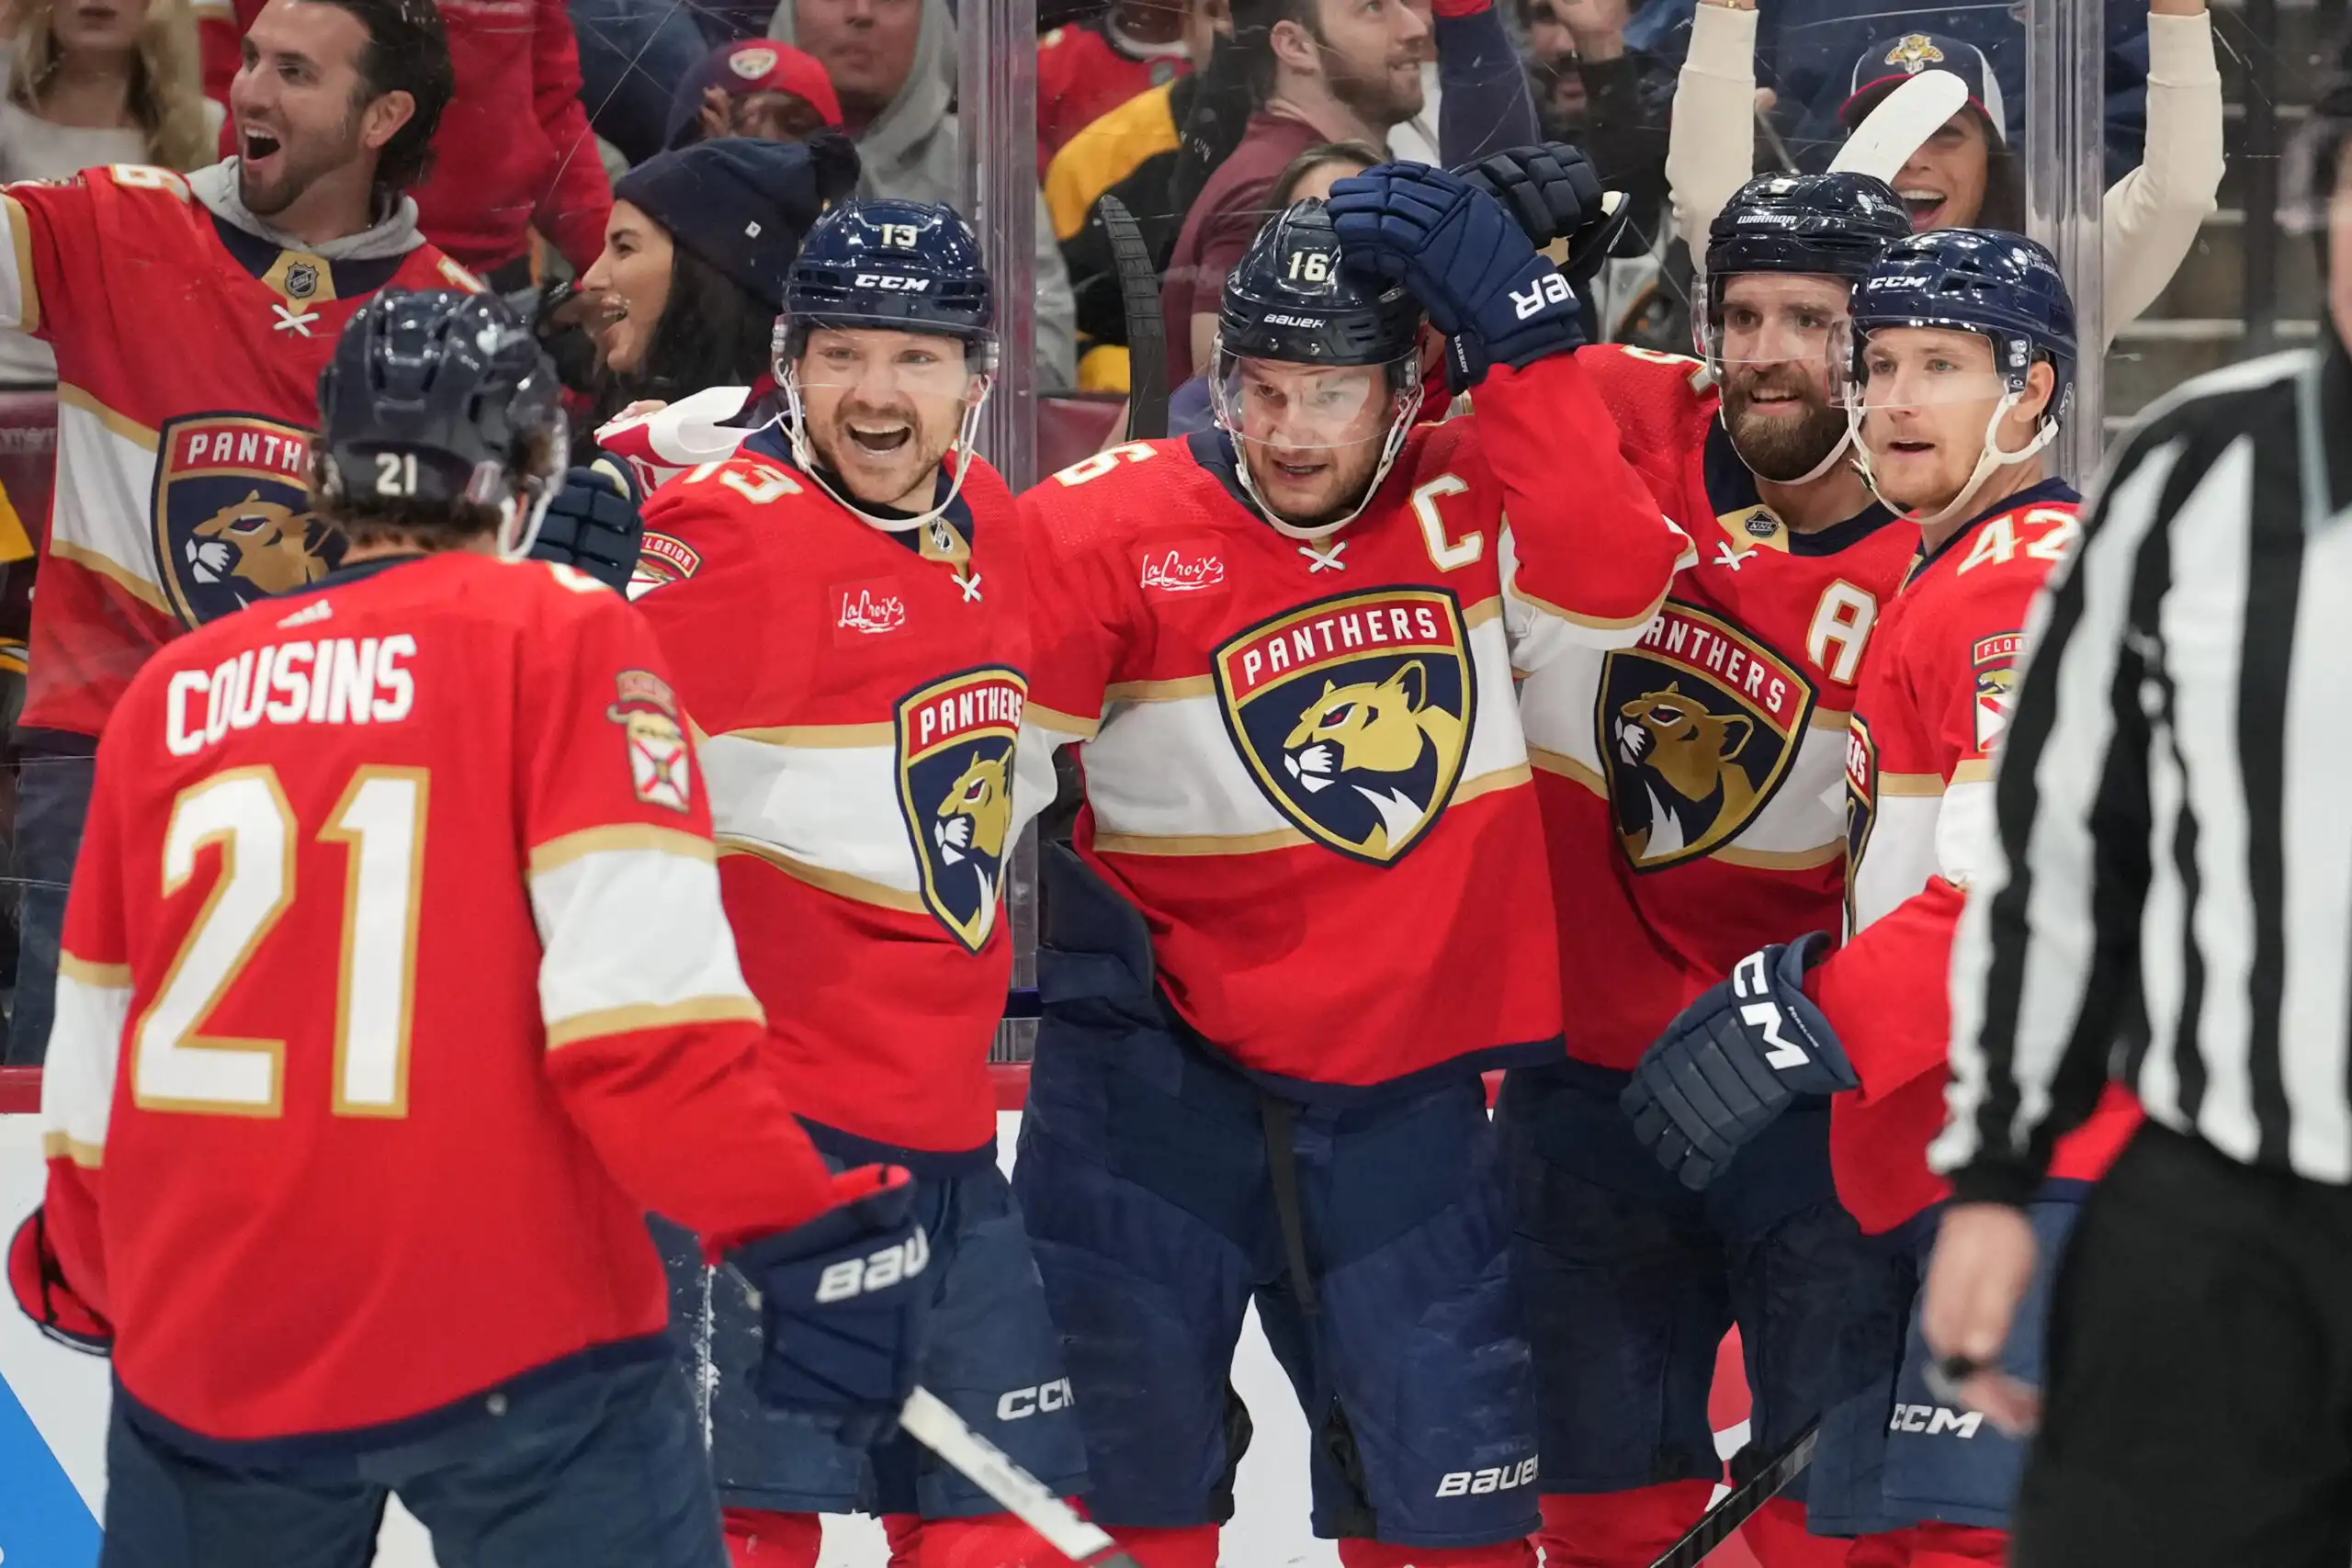 Panthers 5v5 Dominance and Bruins Lack of Discipline Result in 6-1 Shellacking - Boston Bruins News and Analysis